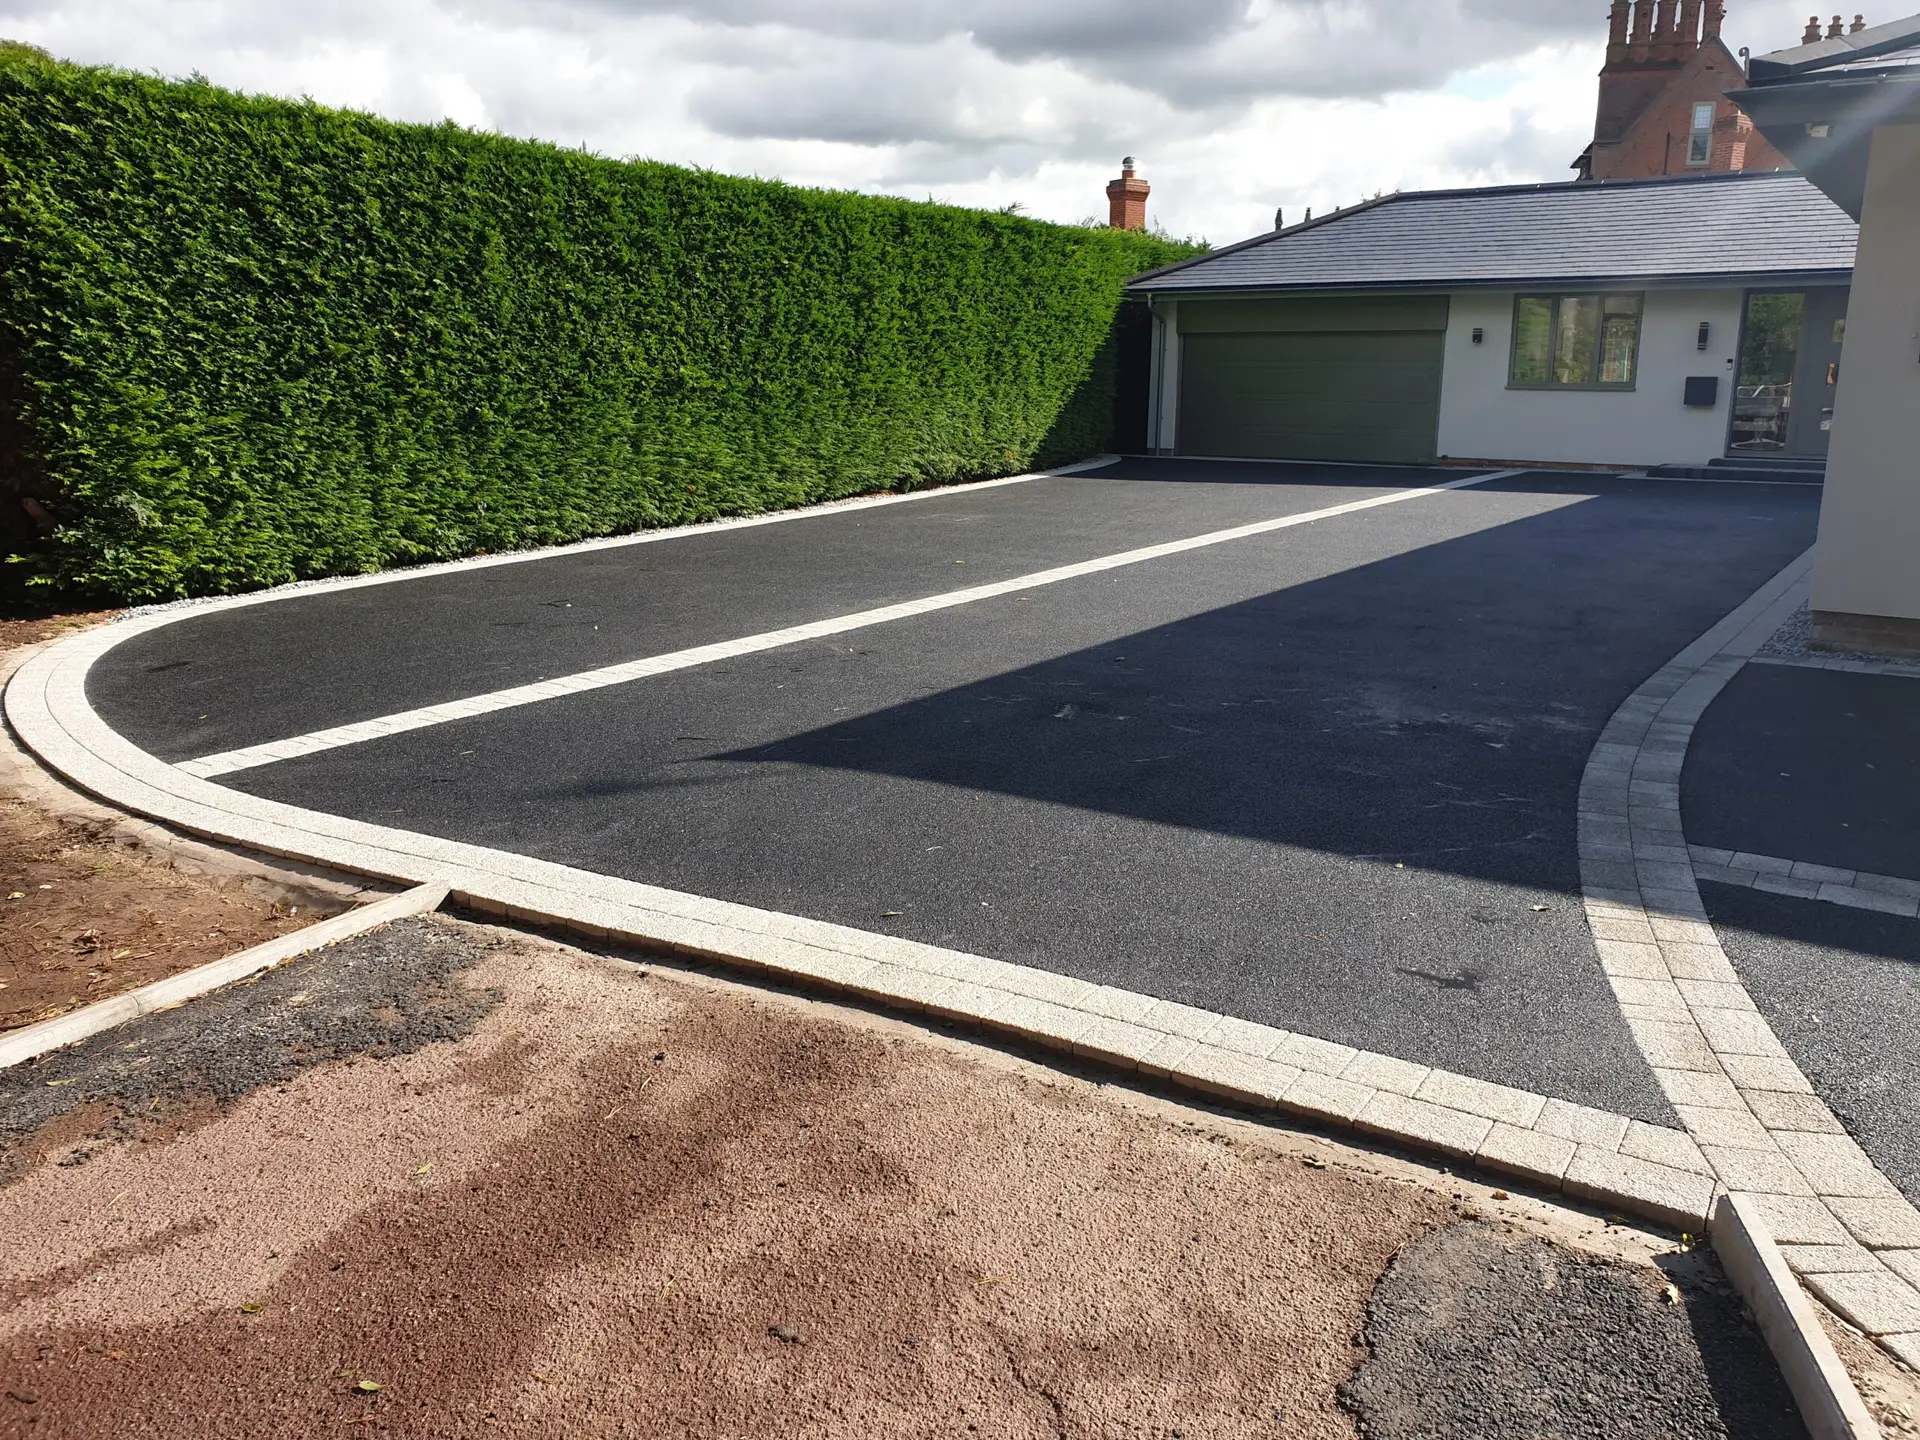 Driveway in Nottingham combining block paving with tarmac for enhanced style and durability.